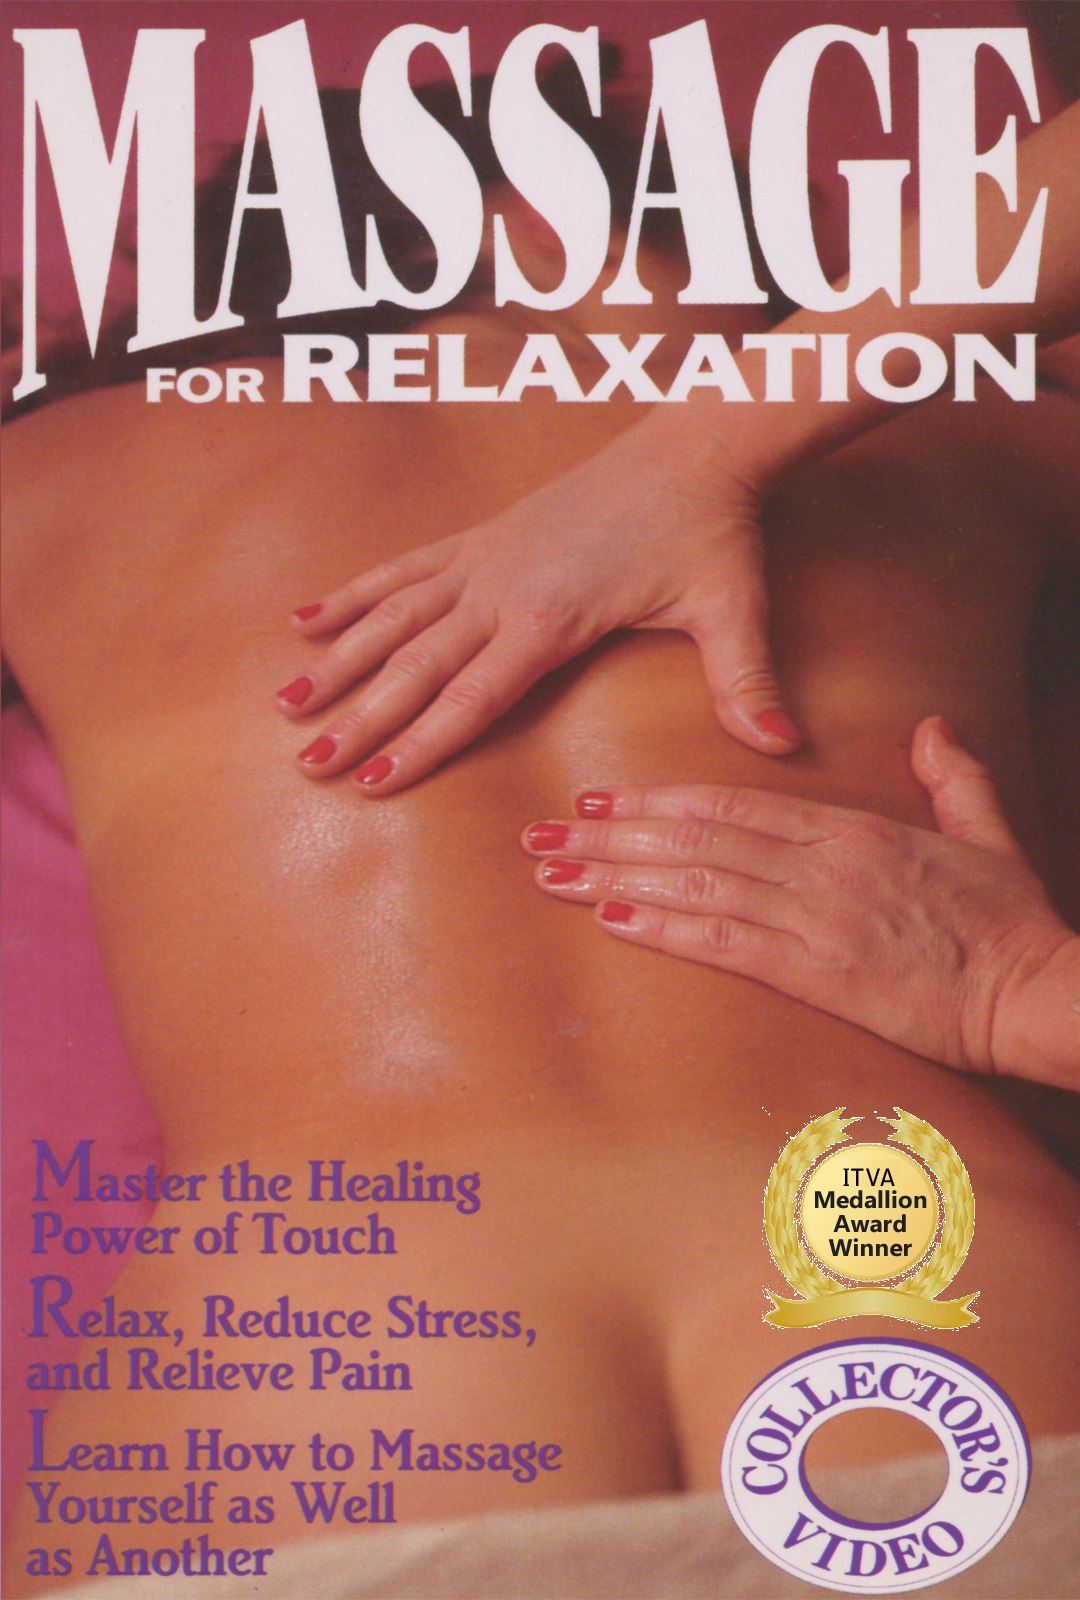 Massage For Relaxation by New and Unique Videos vhs